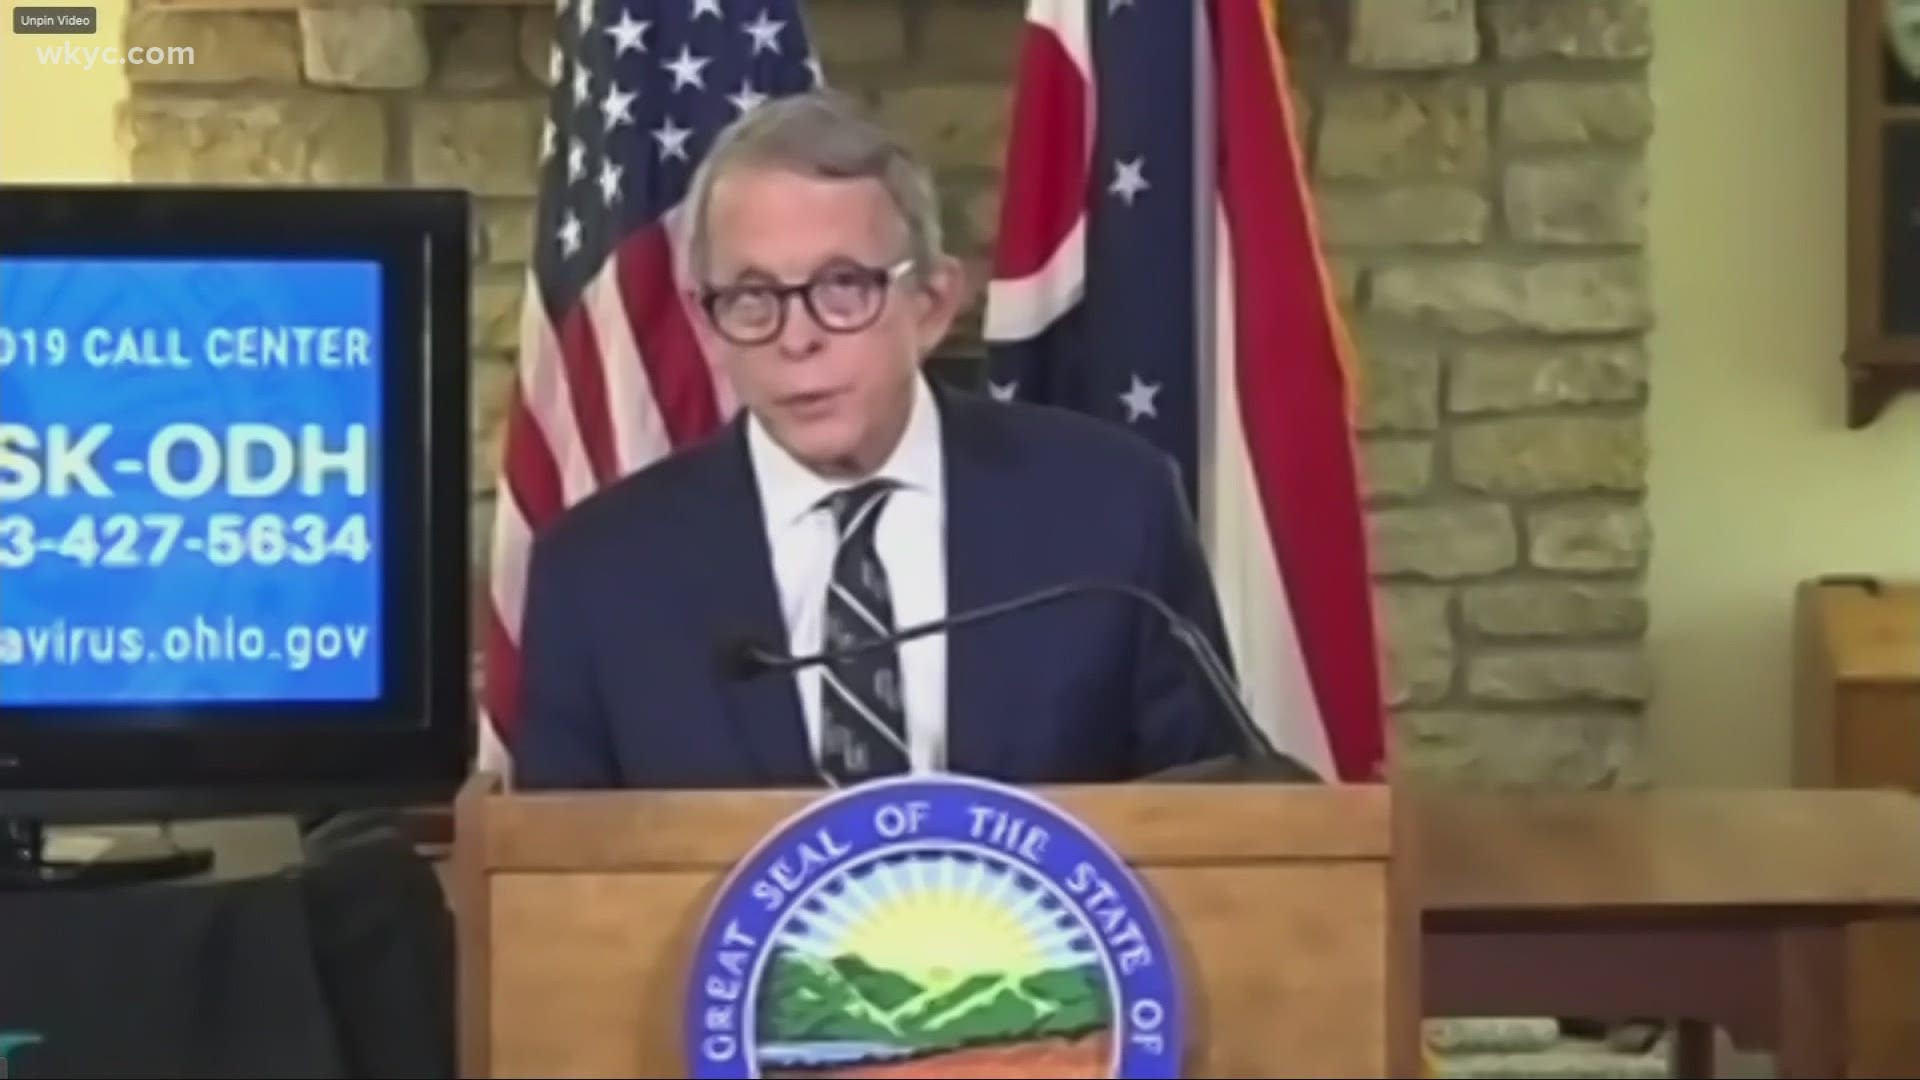 DeWine held a briefing from his house on Friday. He discussed testing positive for the coronavirus before later testing negative.